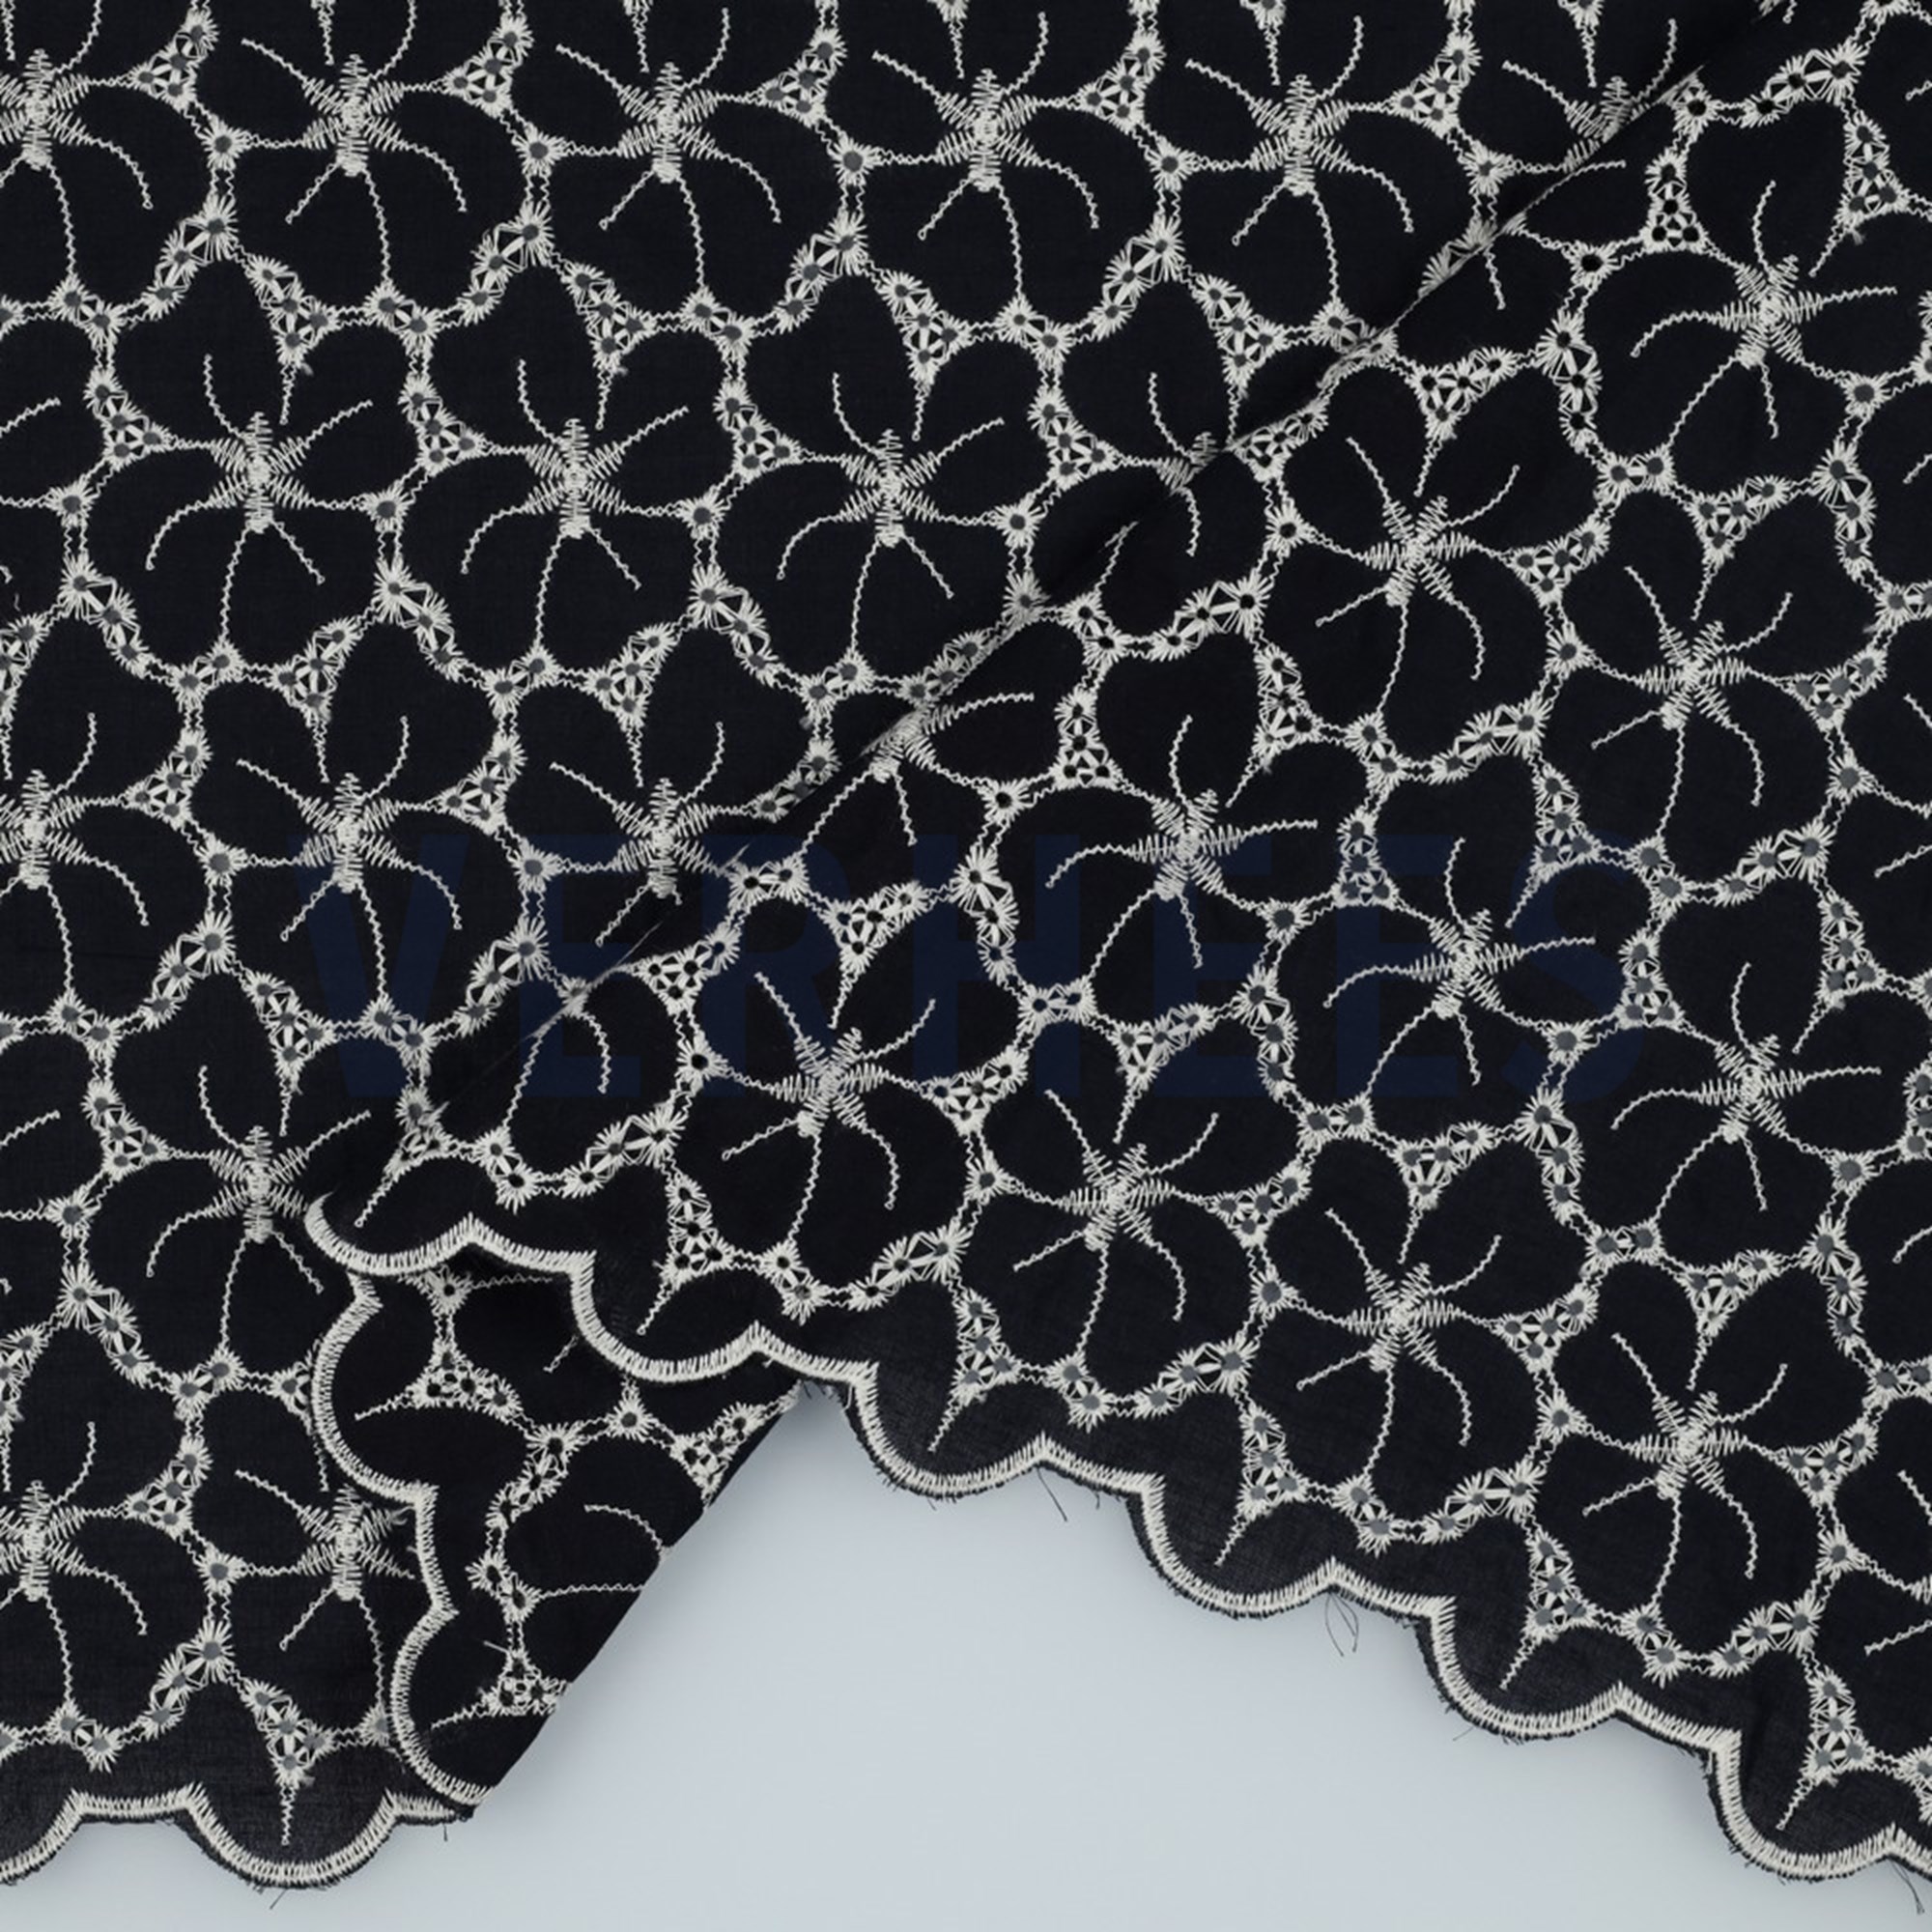 COTTON EMBROIDERY 2-SIDE BORDER NAVY (high resolution) #2